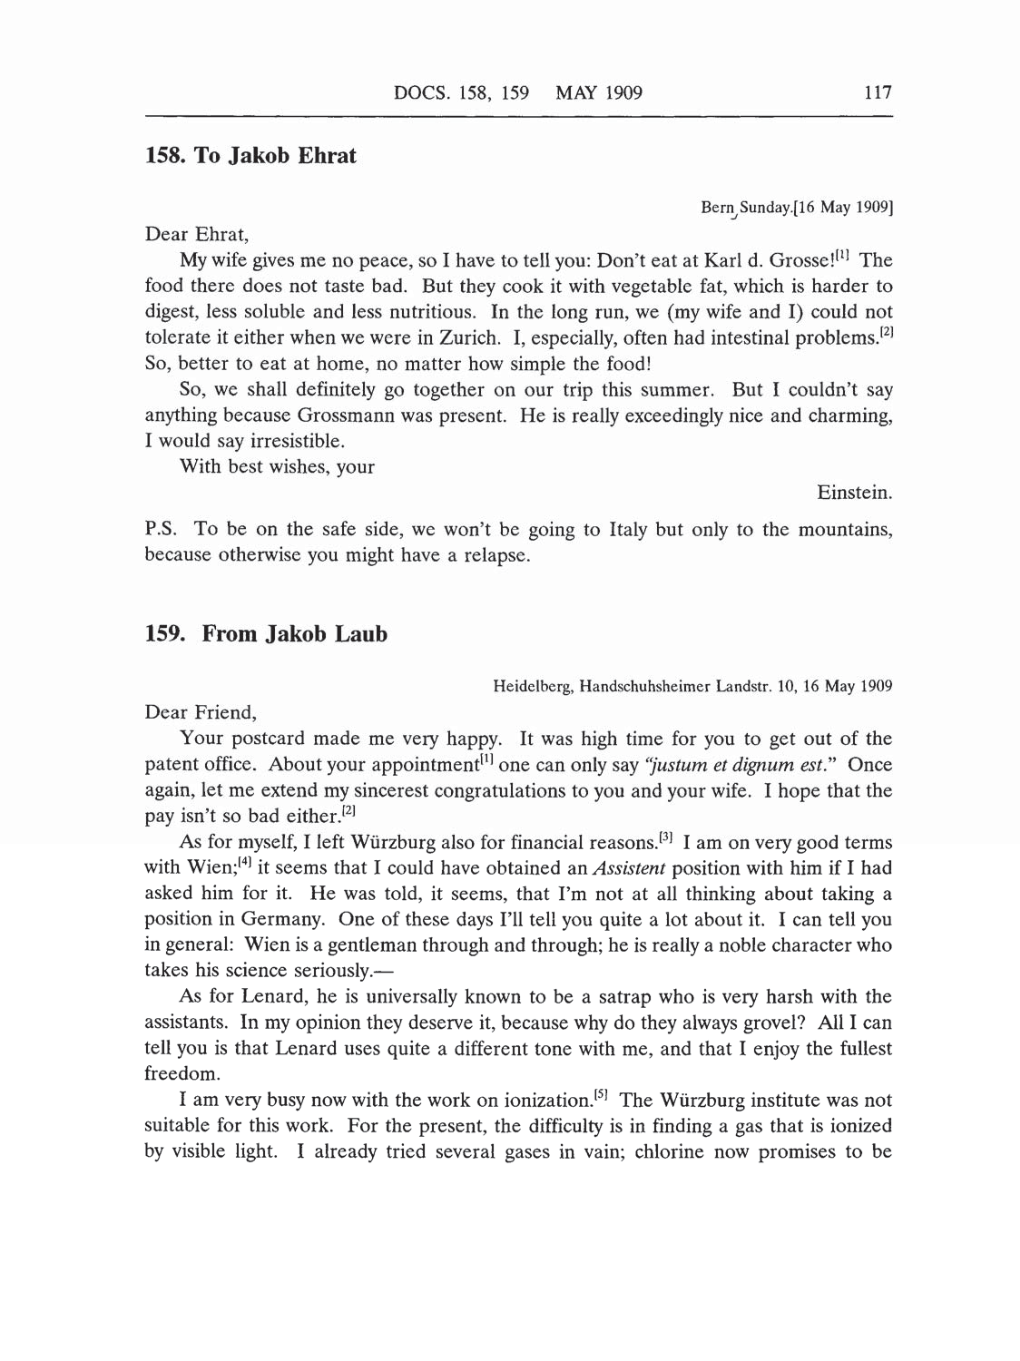 Volume 5: The Swiss Years: Correspondence, 1902-1914 (English translation supplement) page 117